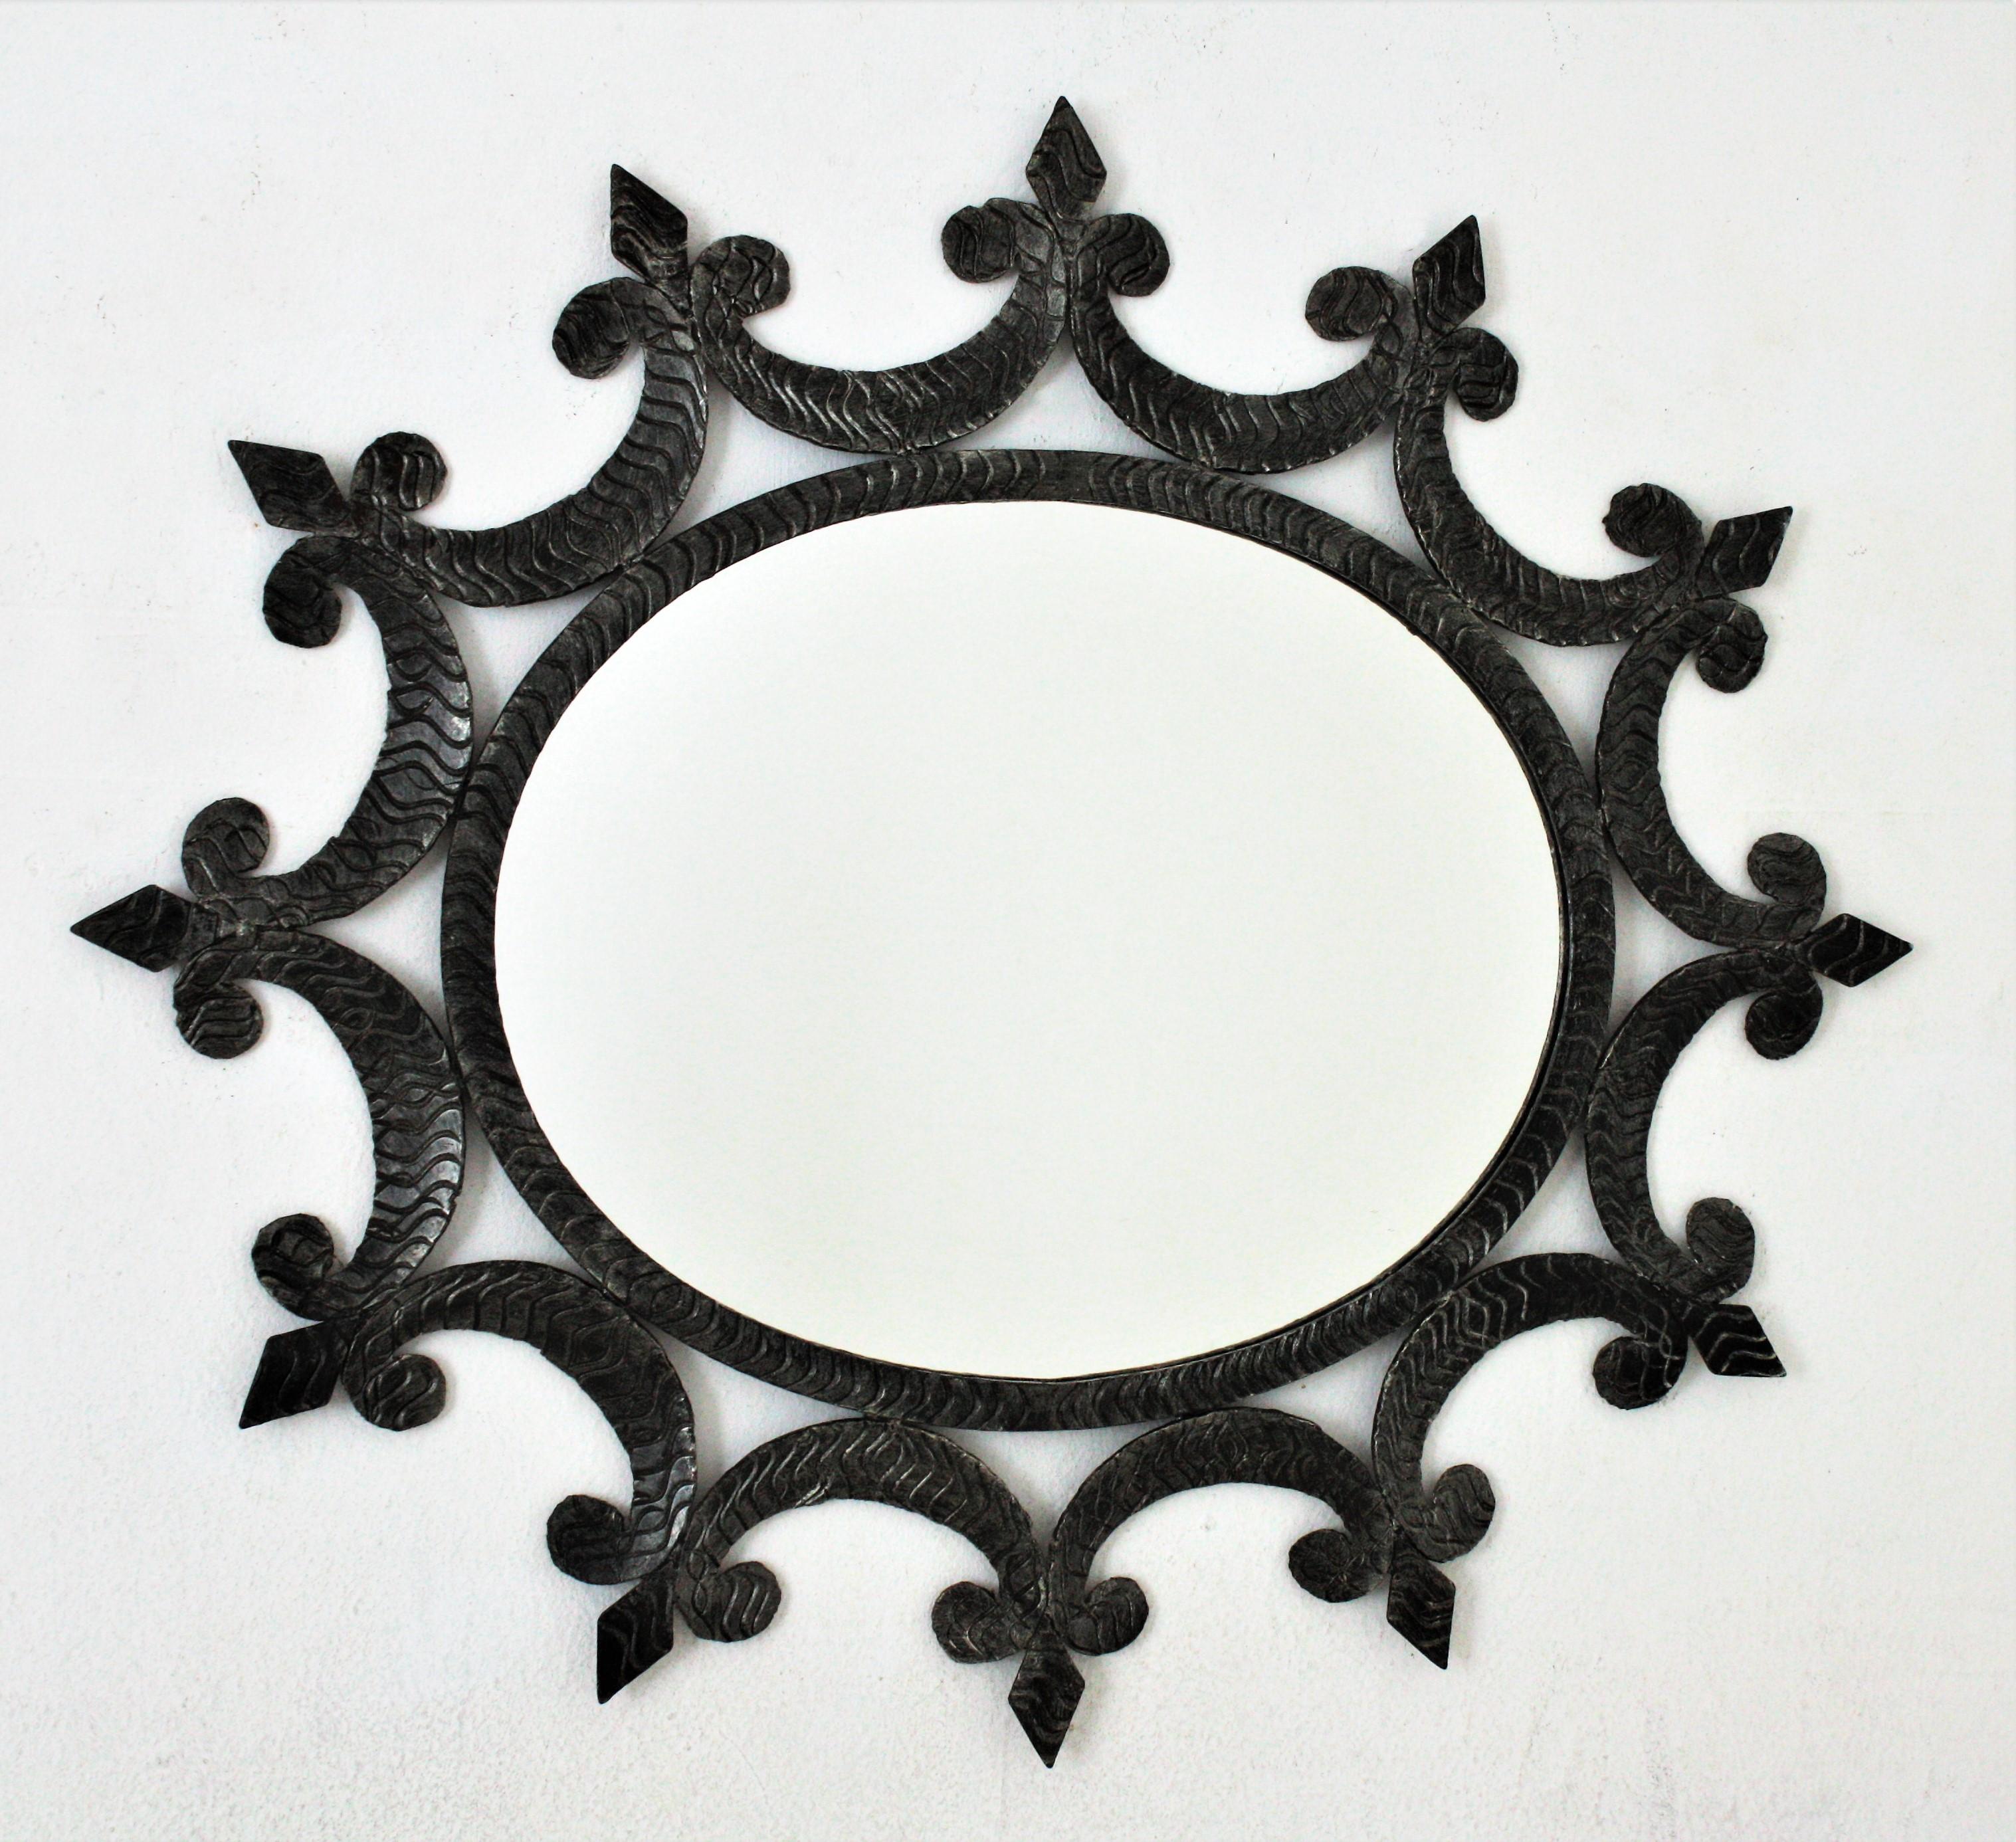 Wrought Iron Oval Sunburst Mirror with Scroll Details and Brutalist Design, Spain, 1950-1960.
Eye-catching hand forged iron mirror with scroll decorations, fleur-de-lis accents and oval shape.
This beautiful oval mirror is heavily decorated by